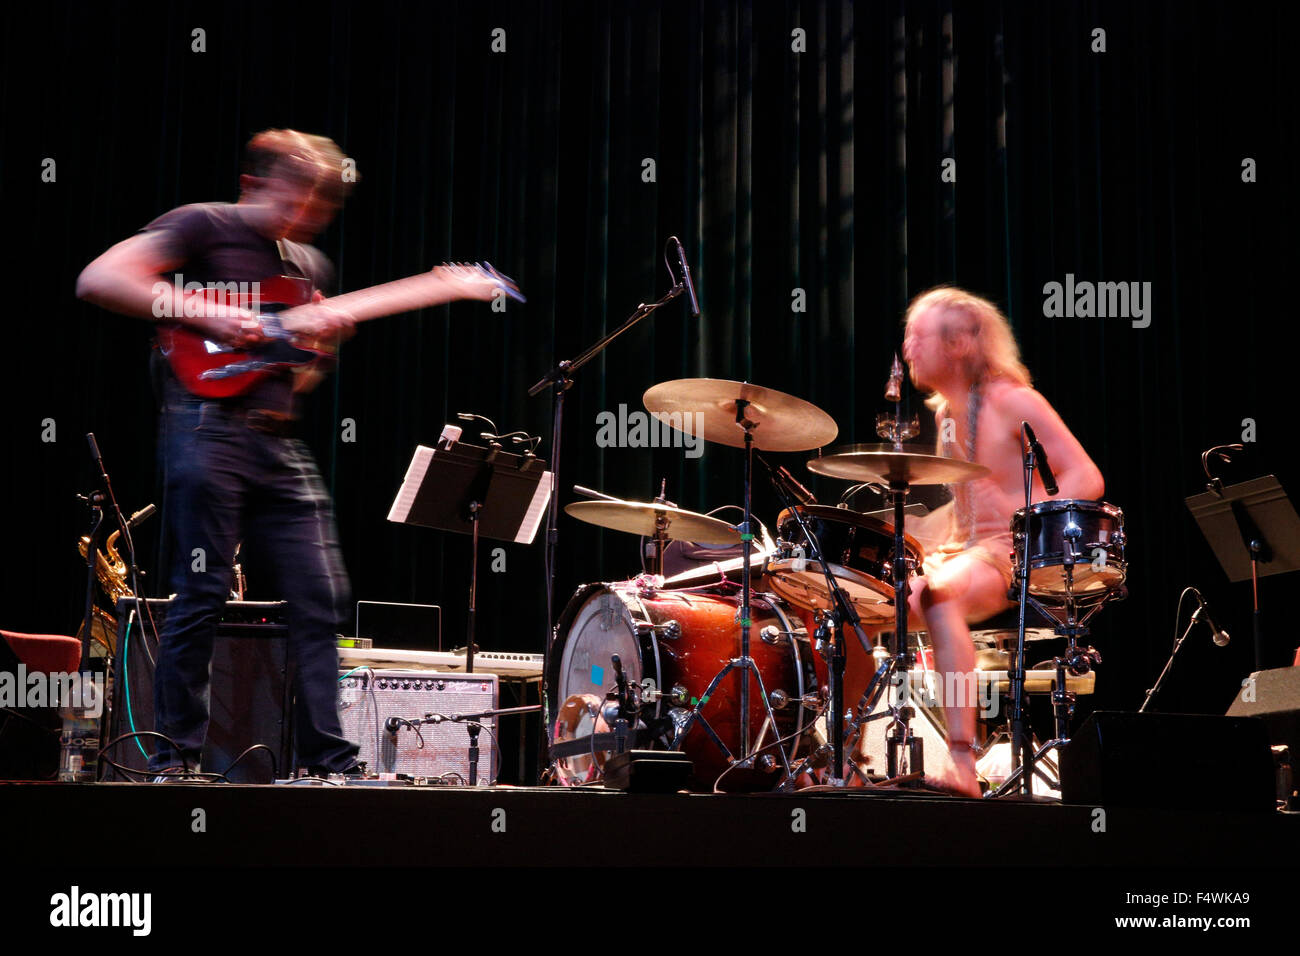 Myth Science Ensemble performs during the Wounded Galaxies Festival, at the Buskirk Chumley Theatre in Bloomington, Indiana. Oct 11, 2015. The Myth-Science Ensemble hails from Kansas City MO and consists of Thomas Aber (bass clarinet, Omaha Symphony) and Dwight Frizzell (reeds and Yamaha WX5, Kansas City Art Institute), along with supporting players from Bloomington, including reed player Marty Belcher, nationally recognized live sound effects artist Tony Brewer, and aerial silk performer Sue Rall. Myth-Science Ensemble incorporate 4-channel sound, movement, and projected images to create live Stock Photo